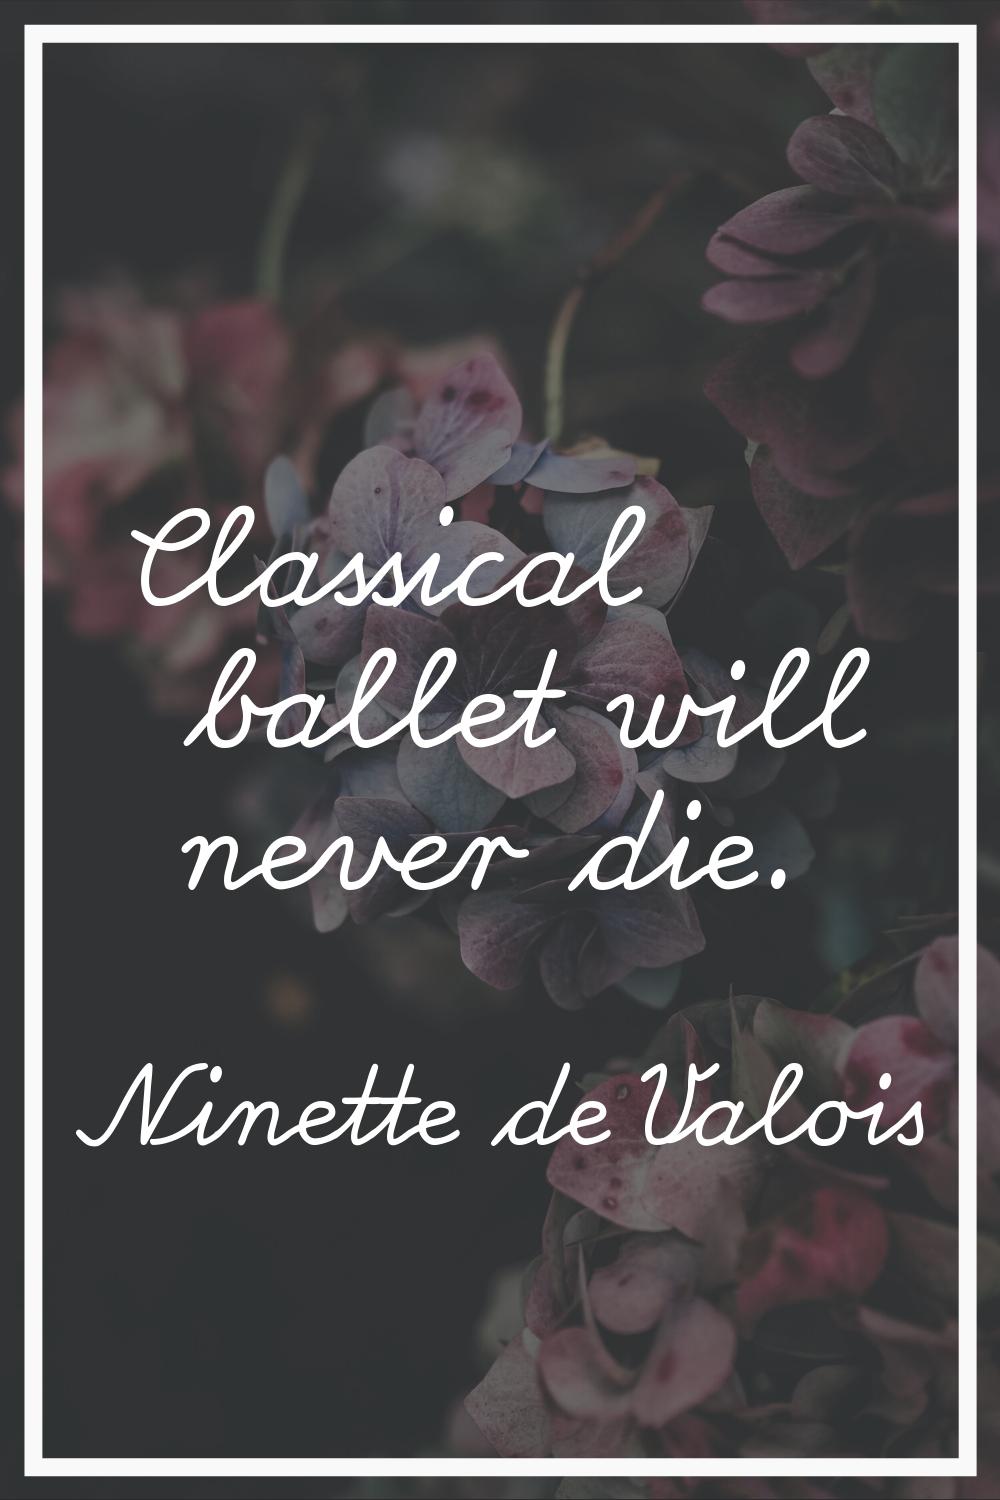 Classical ballet will never die.